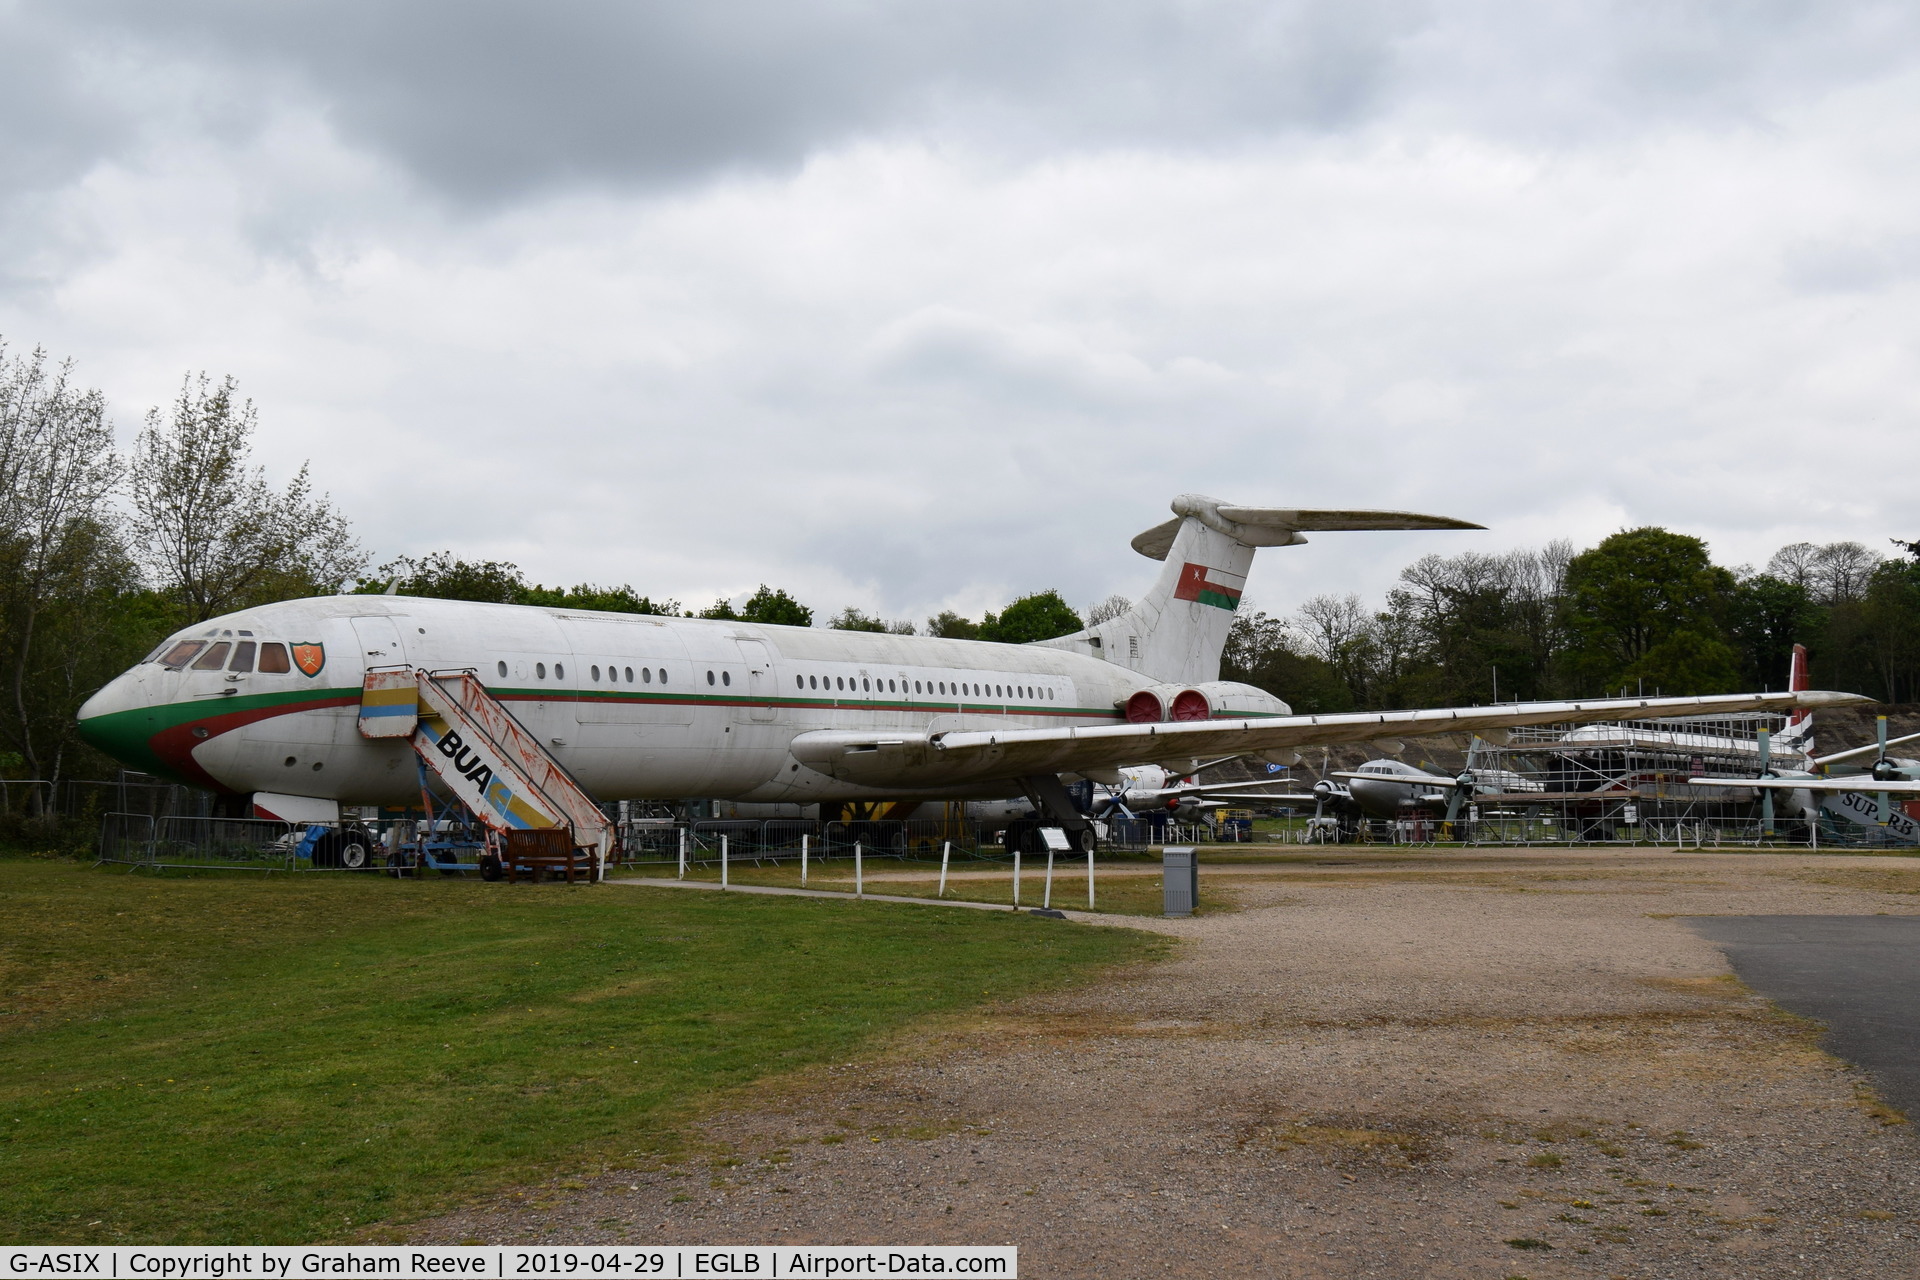 G-ASIX, 1963 Vickers VC10 Srs 1103 C/N 820, On display at the Brooklands Museum.